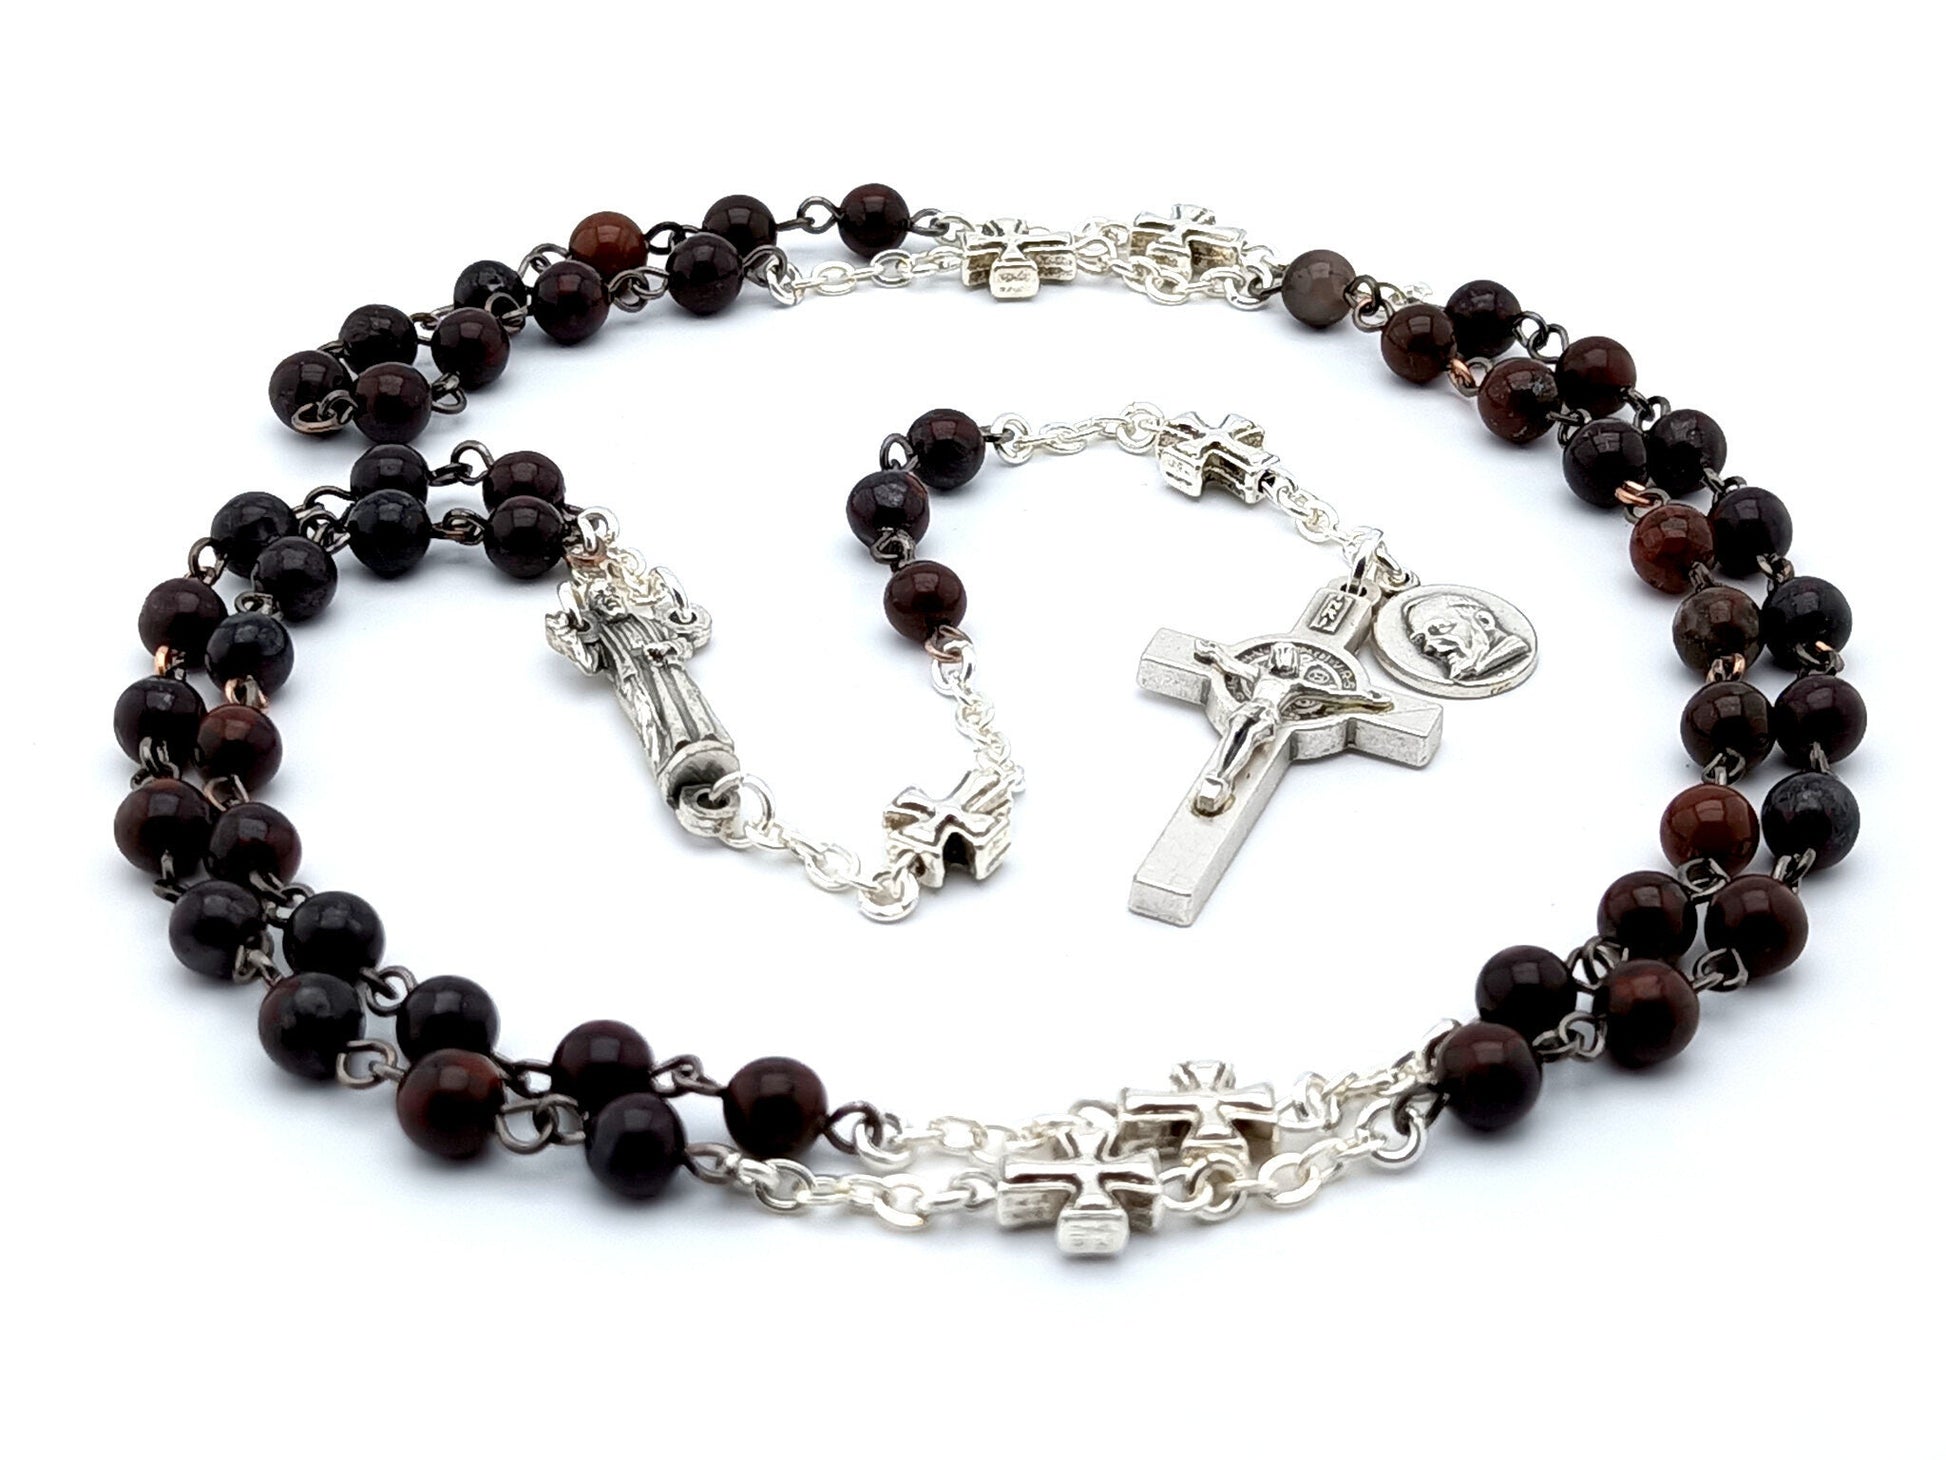 Saint Padre Pio unique rosary beads with deep red gemstone beads, silver pater beads, crucifix and statue centre medal.